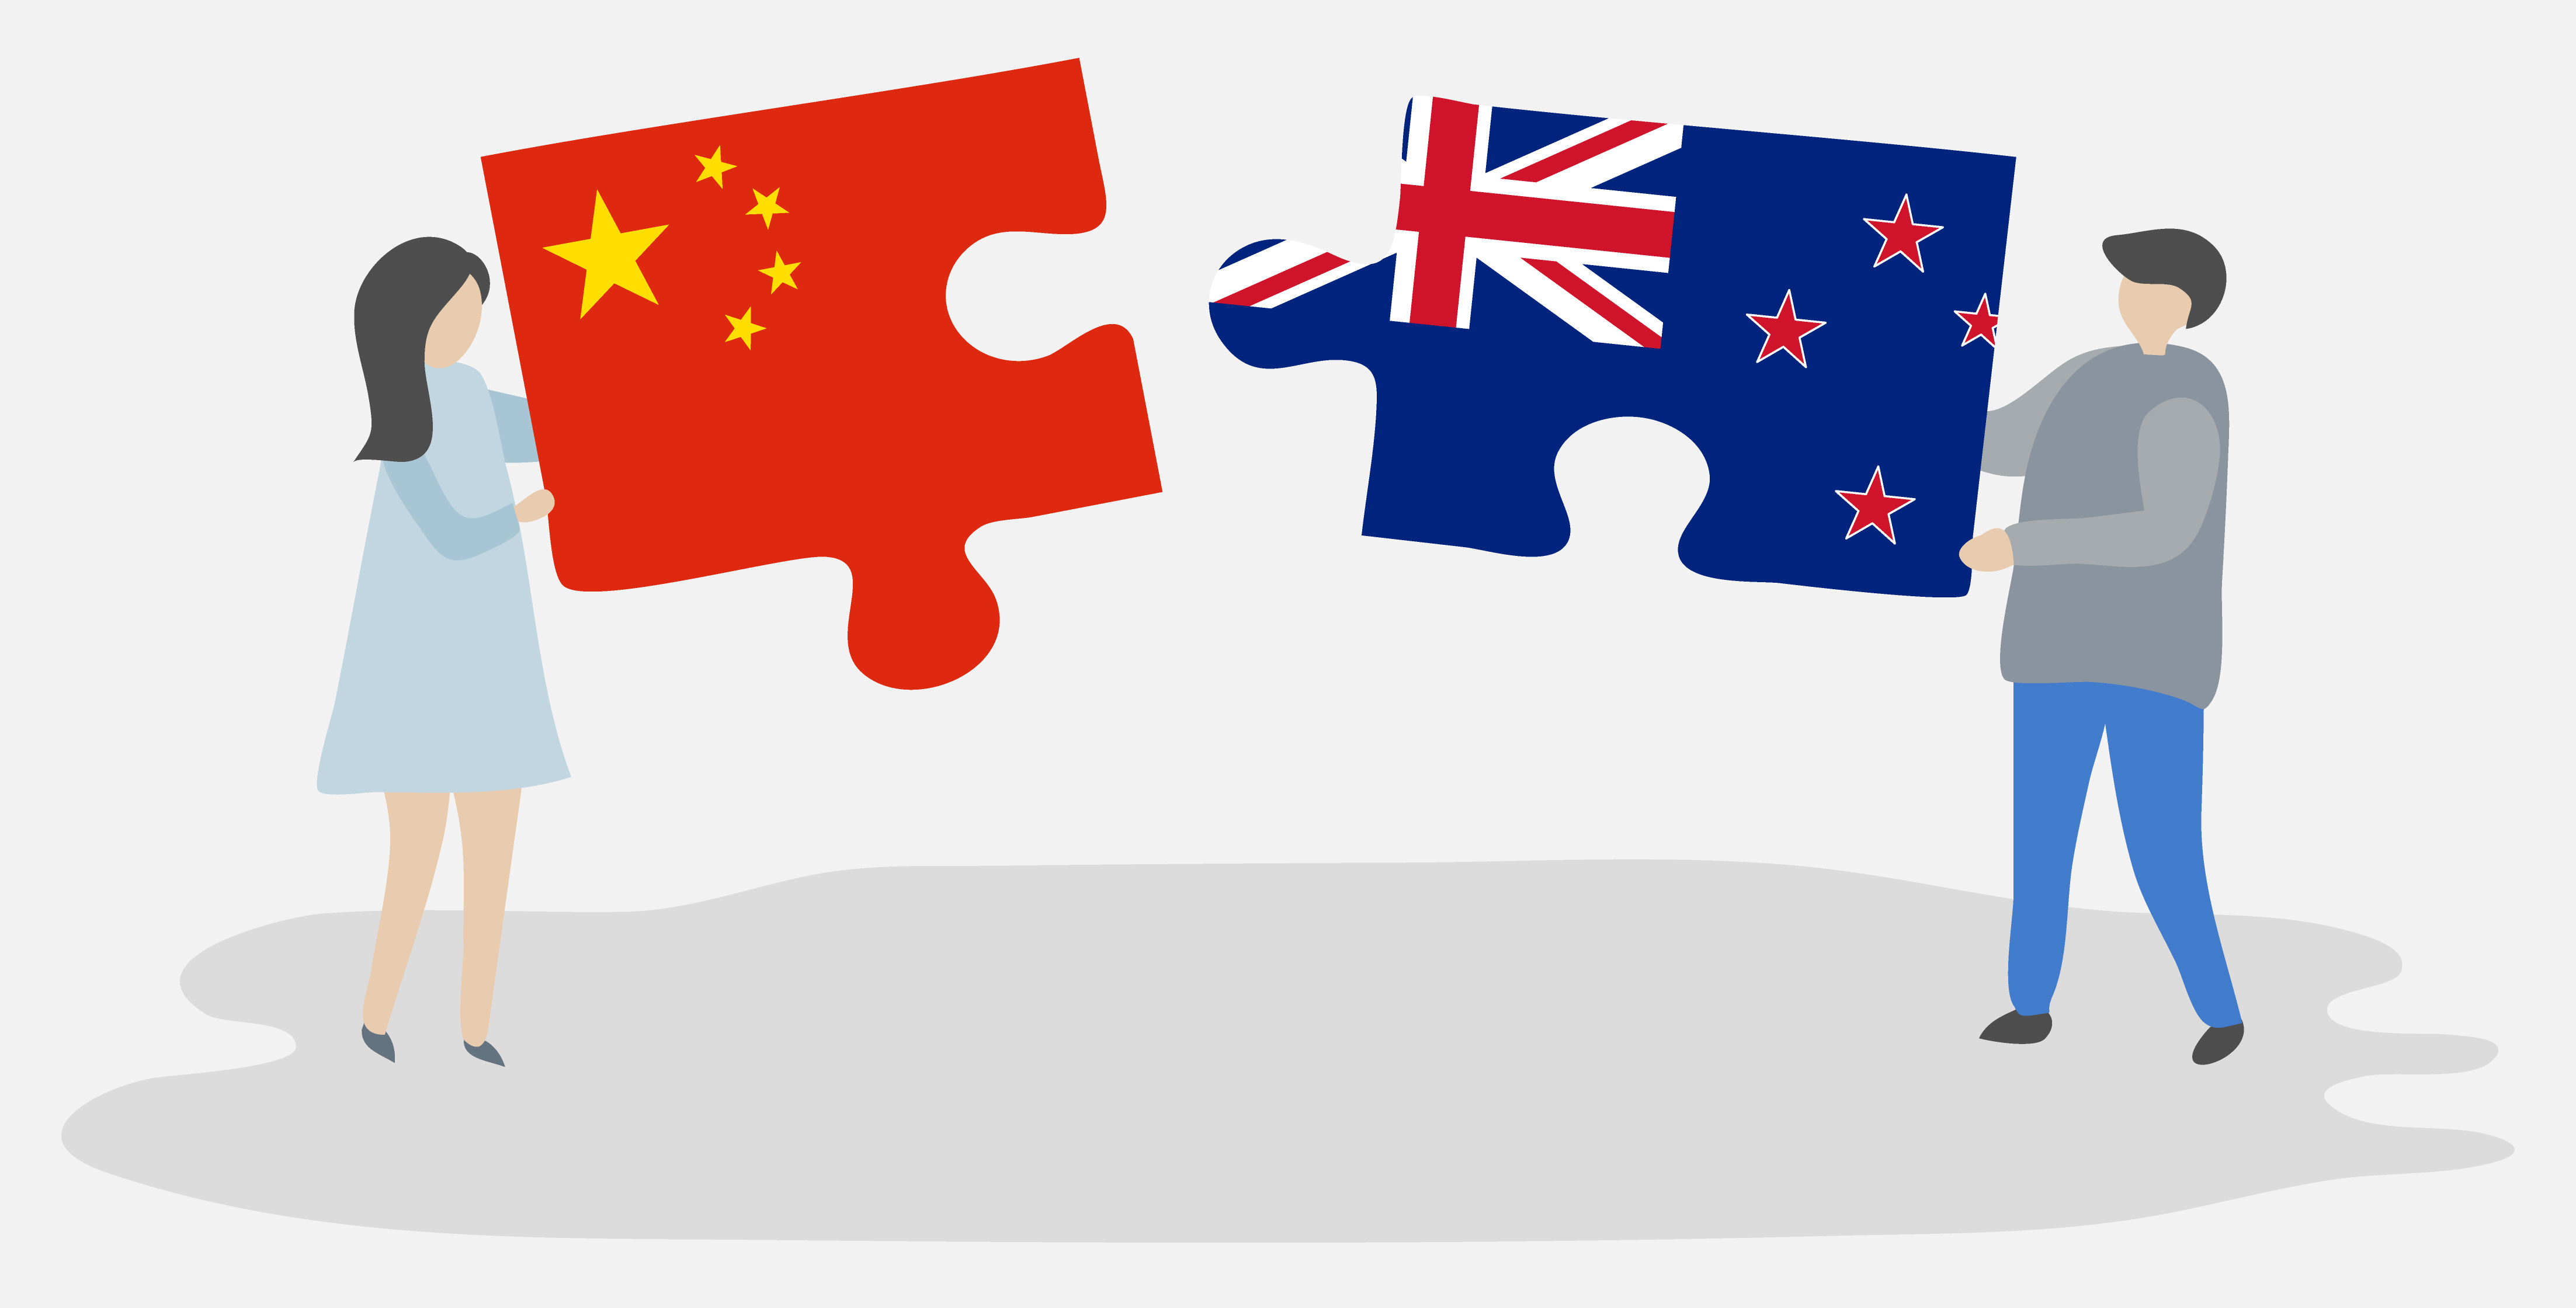 Image of two people holding a jigsaw puzzle with the flags of China and New Zealand